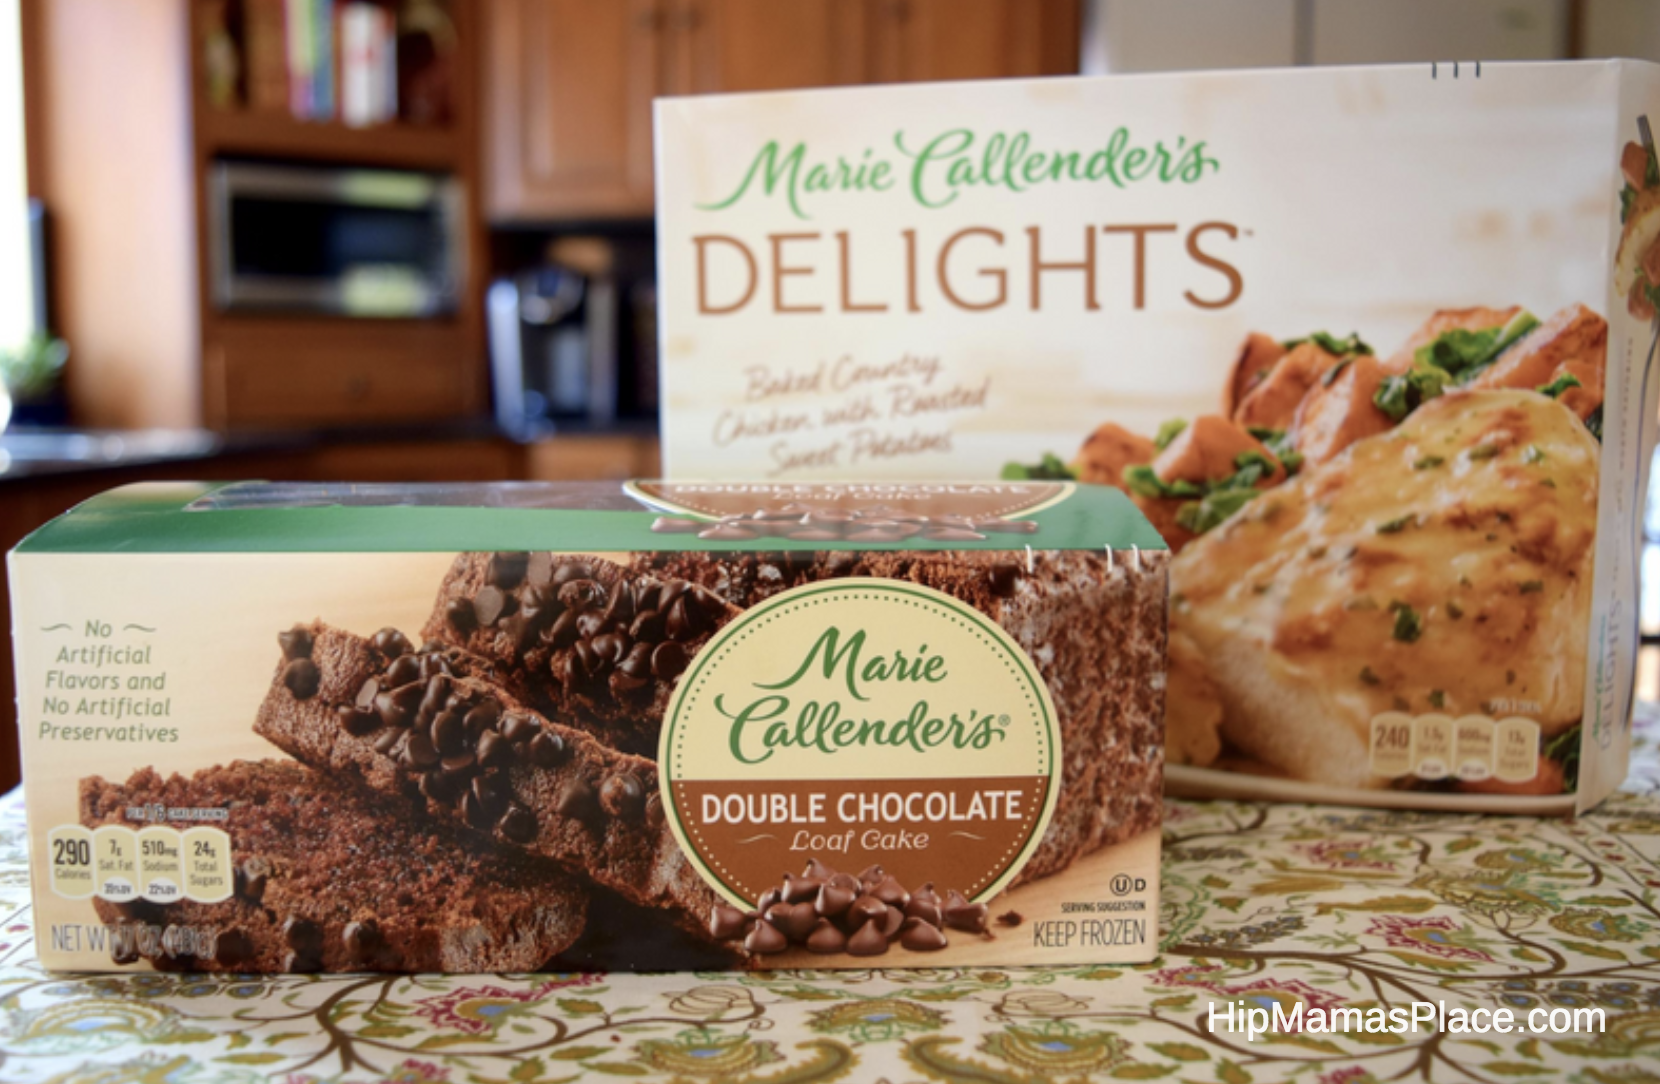 Recently, we’ve been loving the Marie Callender’s Delights frozen dinners featuring many of our favorite comfort food favorites like the Balsamic Glazed Chicken with Harvest Vegetables, Baked Turkey Meatballs in a Crushed Tomato Basil Sauce and many more!